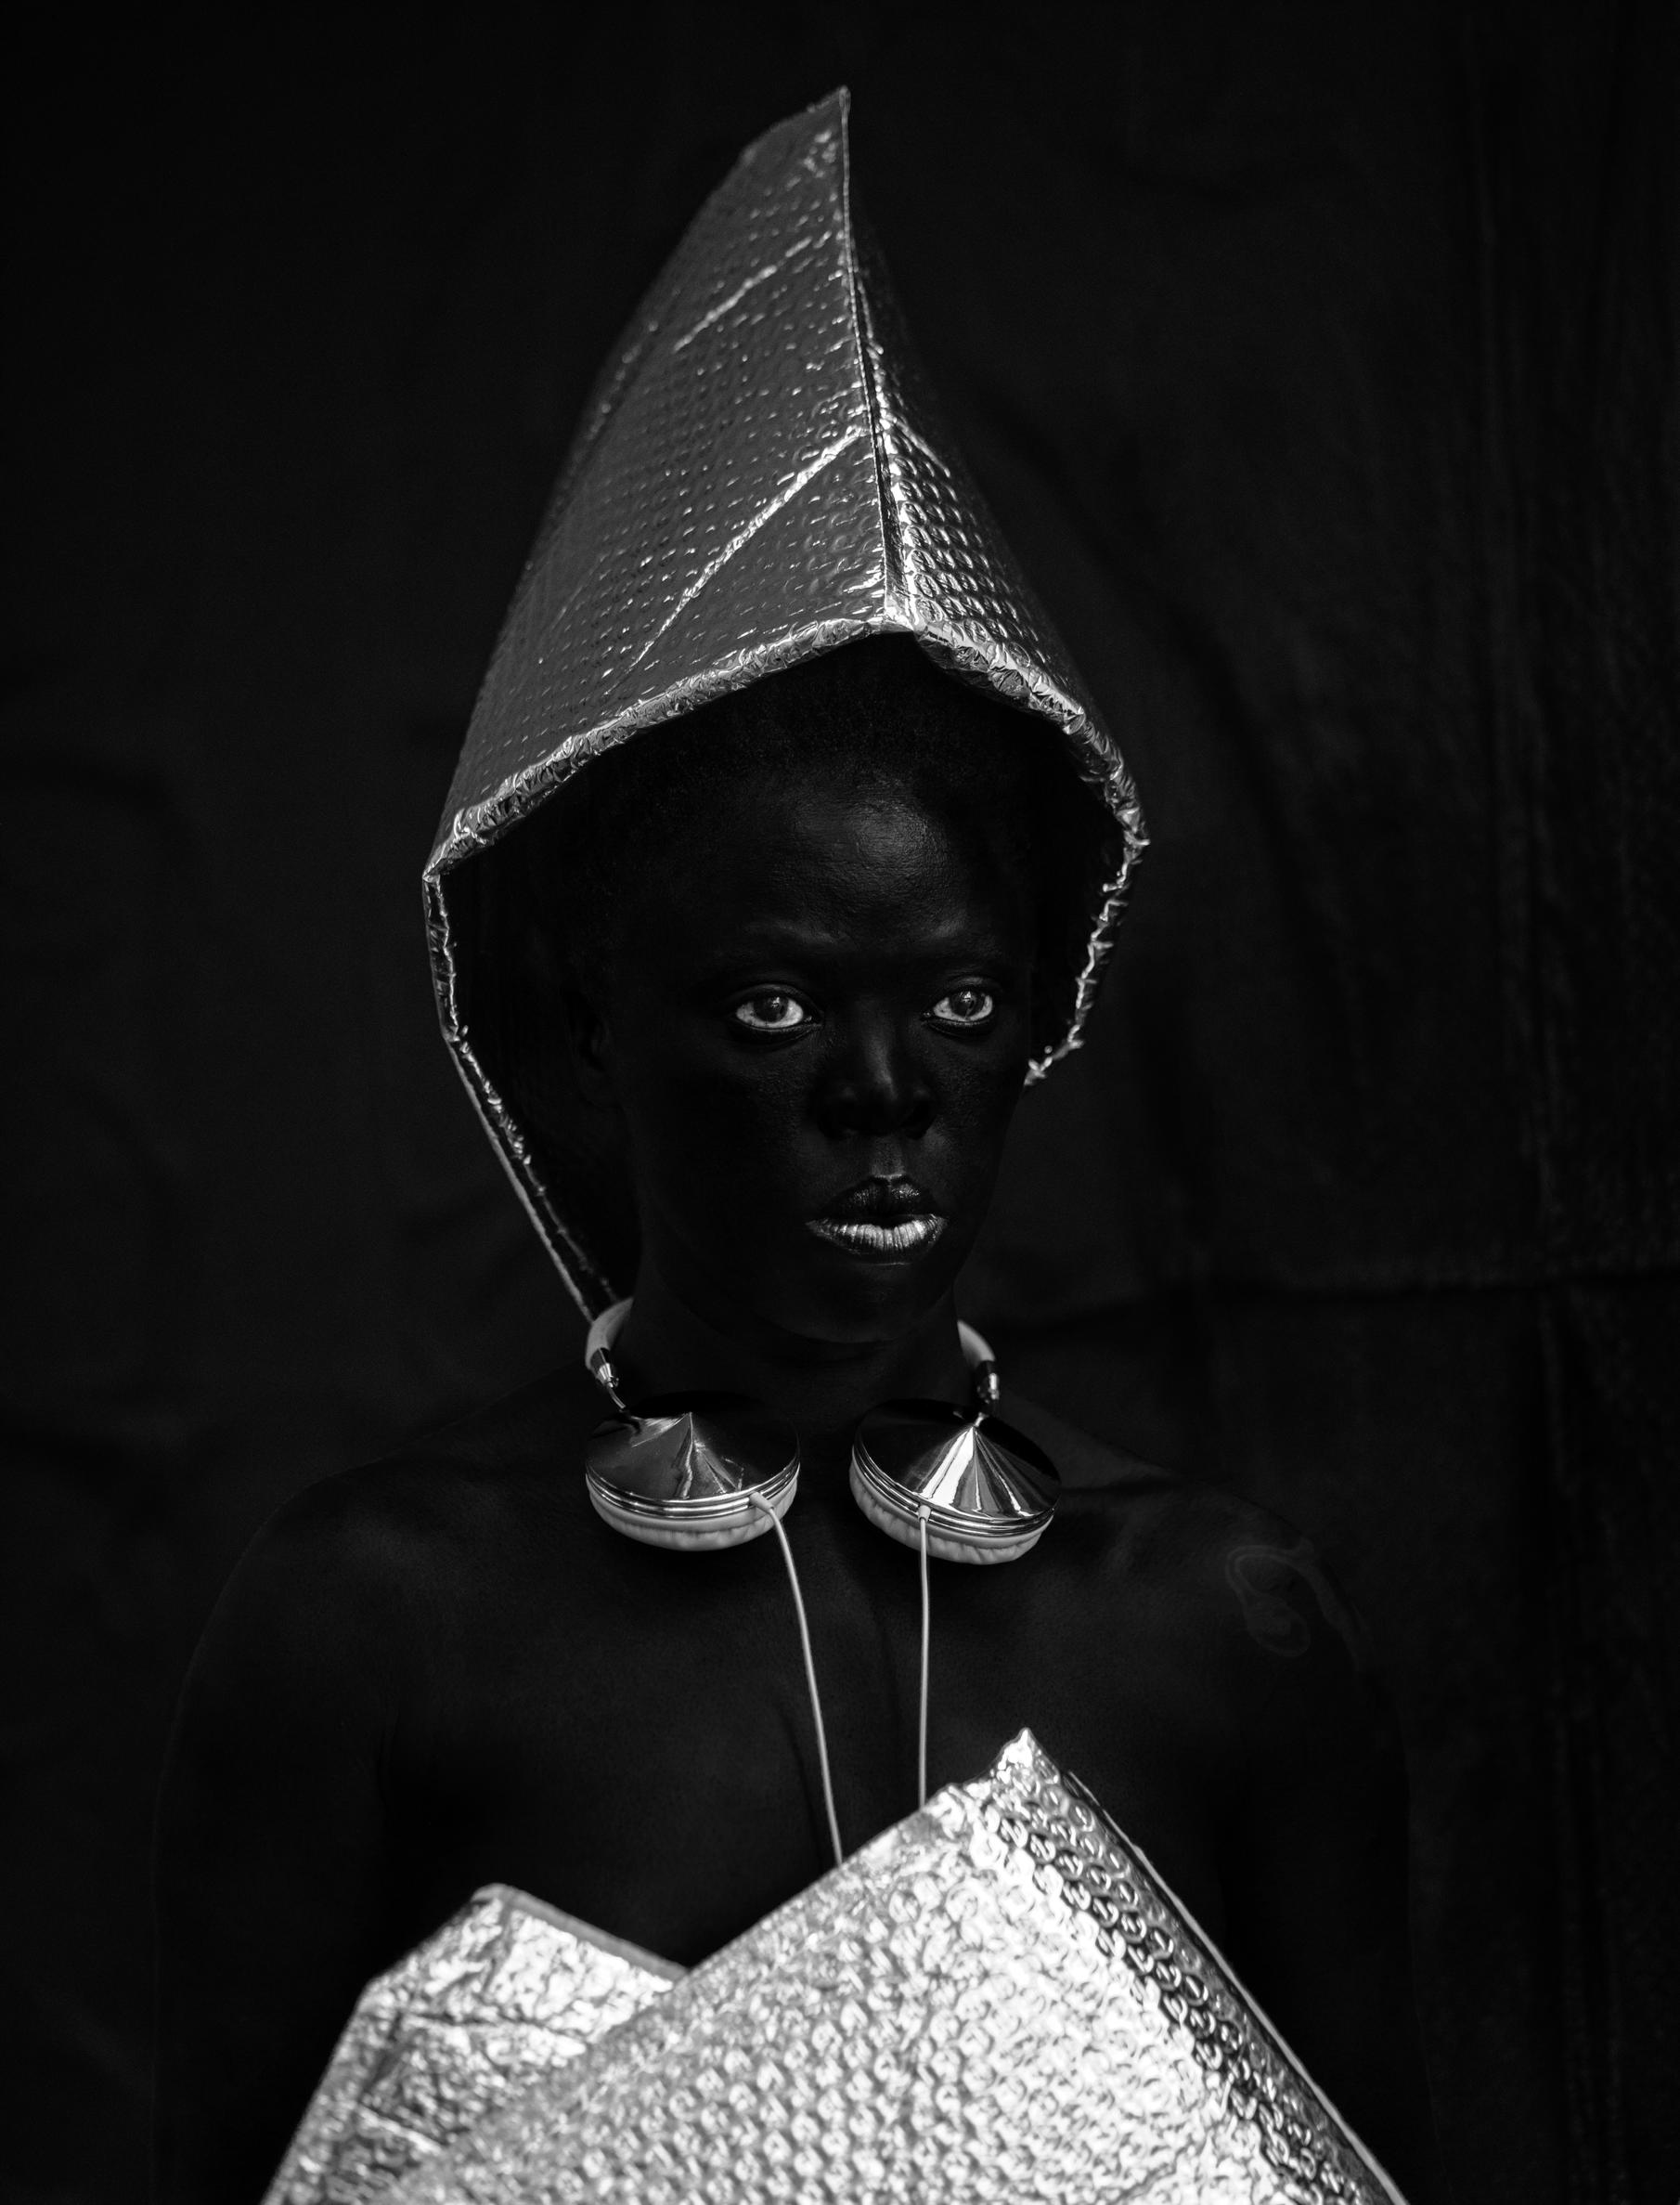 A black and white photo of a person with cushioned envelopes on the top of their head and as a top.